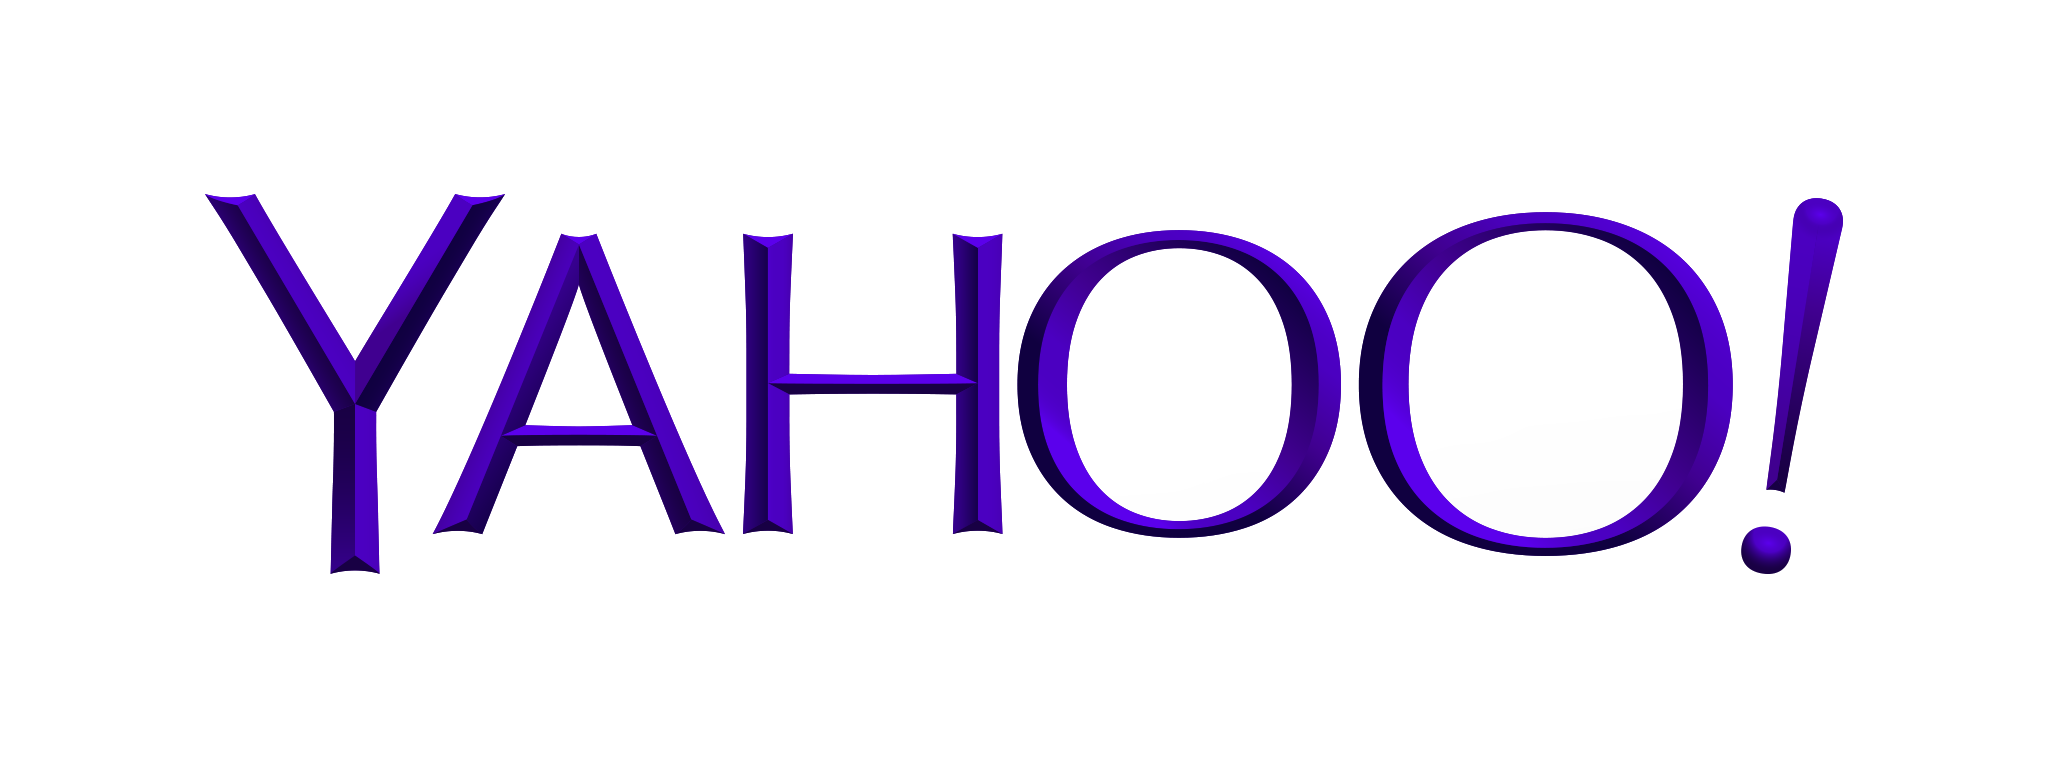 Yahoo rumored to wage war on Google Now, Siri, and Cortana with its own personal assistant, "Index"